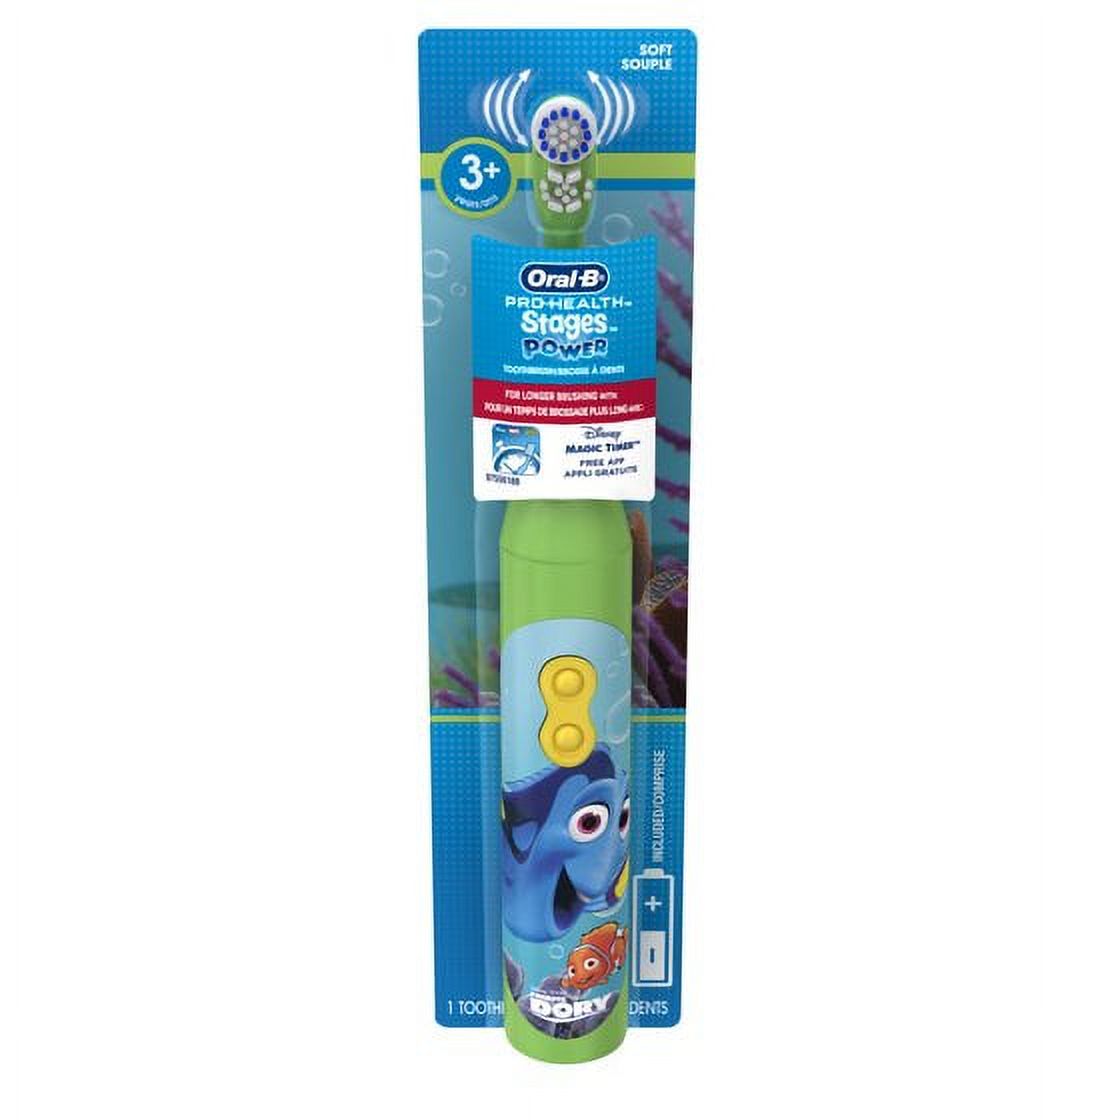 Oral-B Kids Pro-Health Stages Finding Dory Battery Electric Toothbrush - image 5 of 6